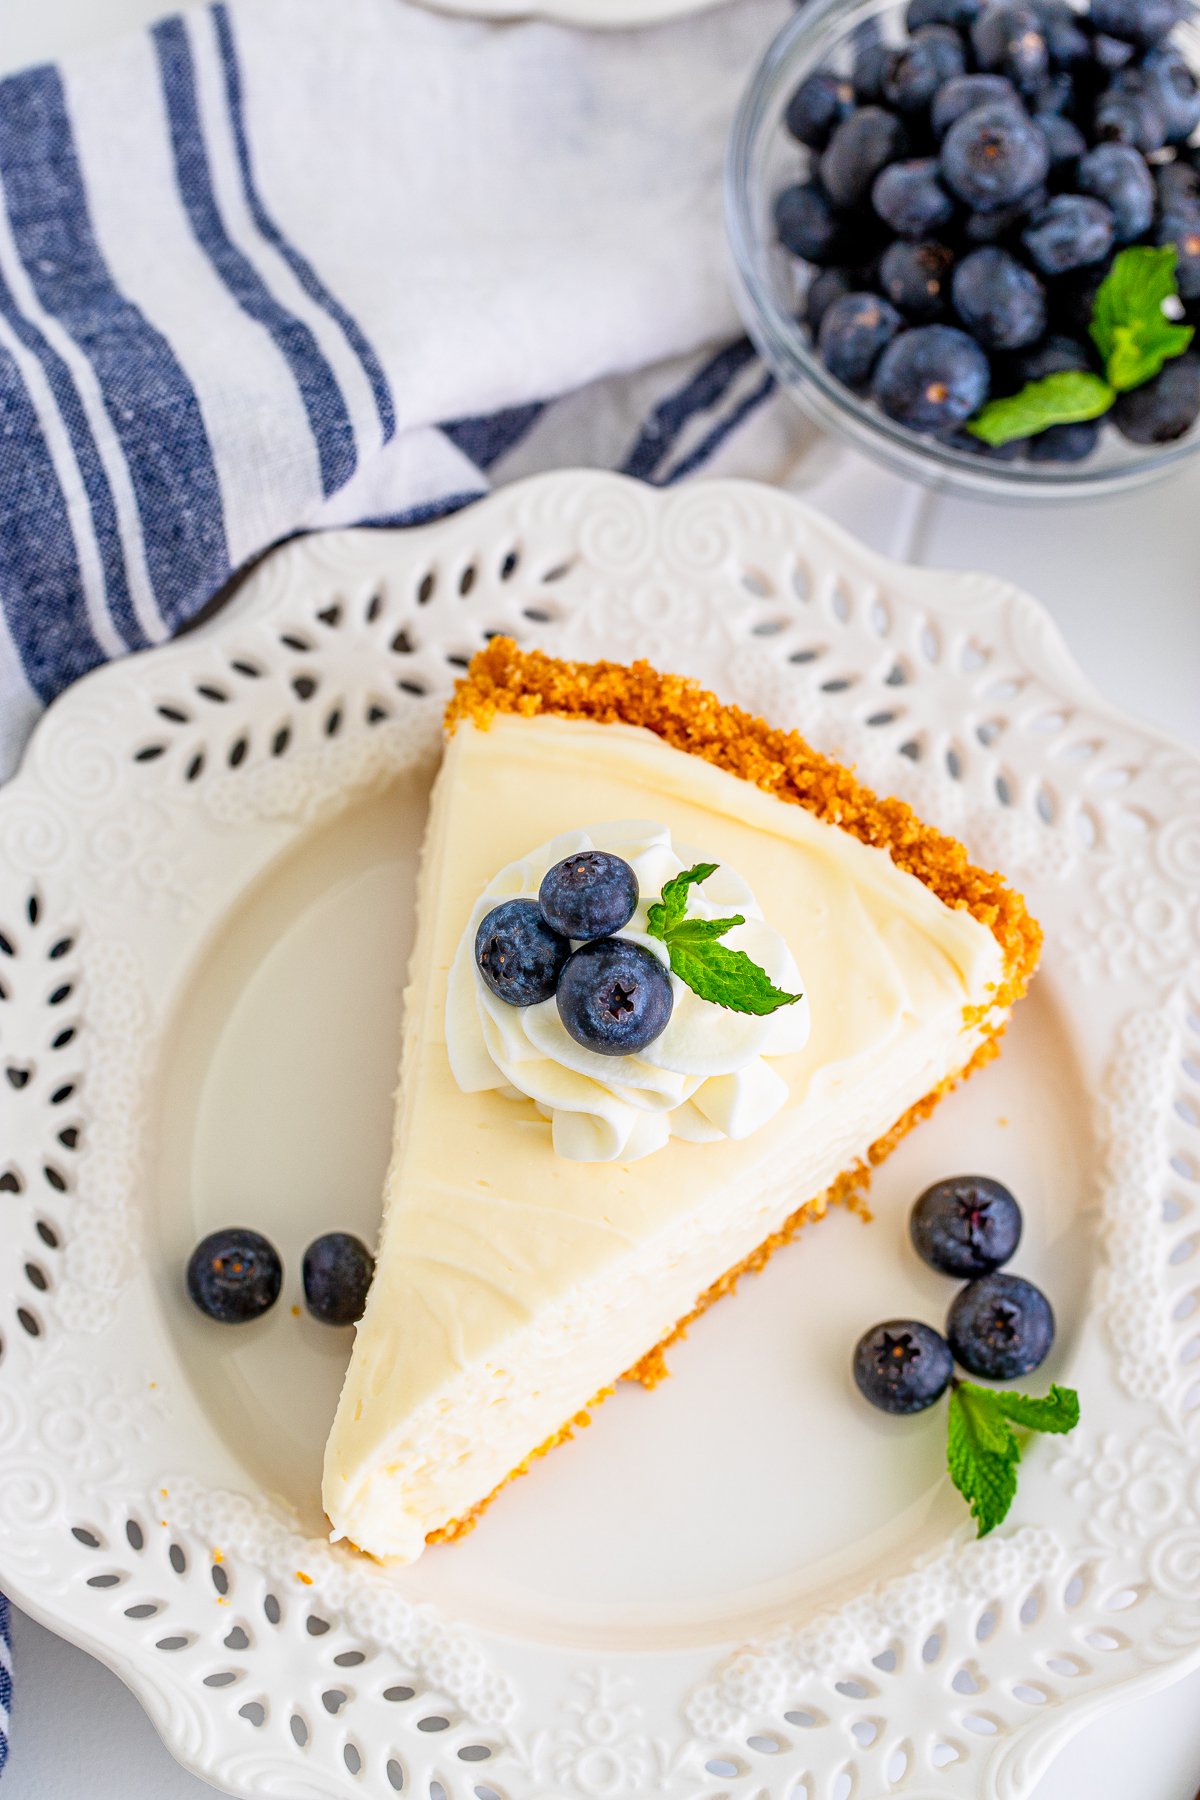 Overhead of slice of cheesecake on white plate with garnishes.